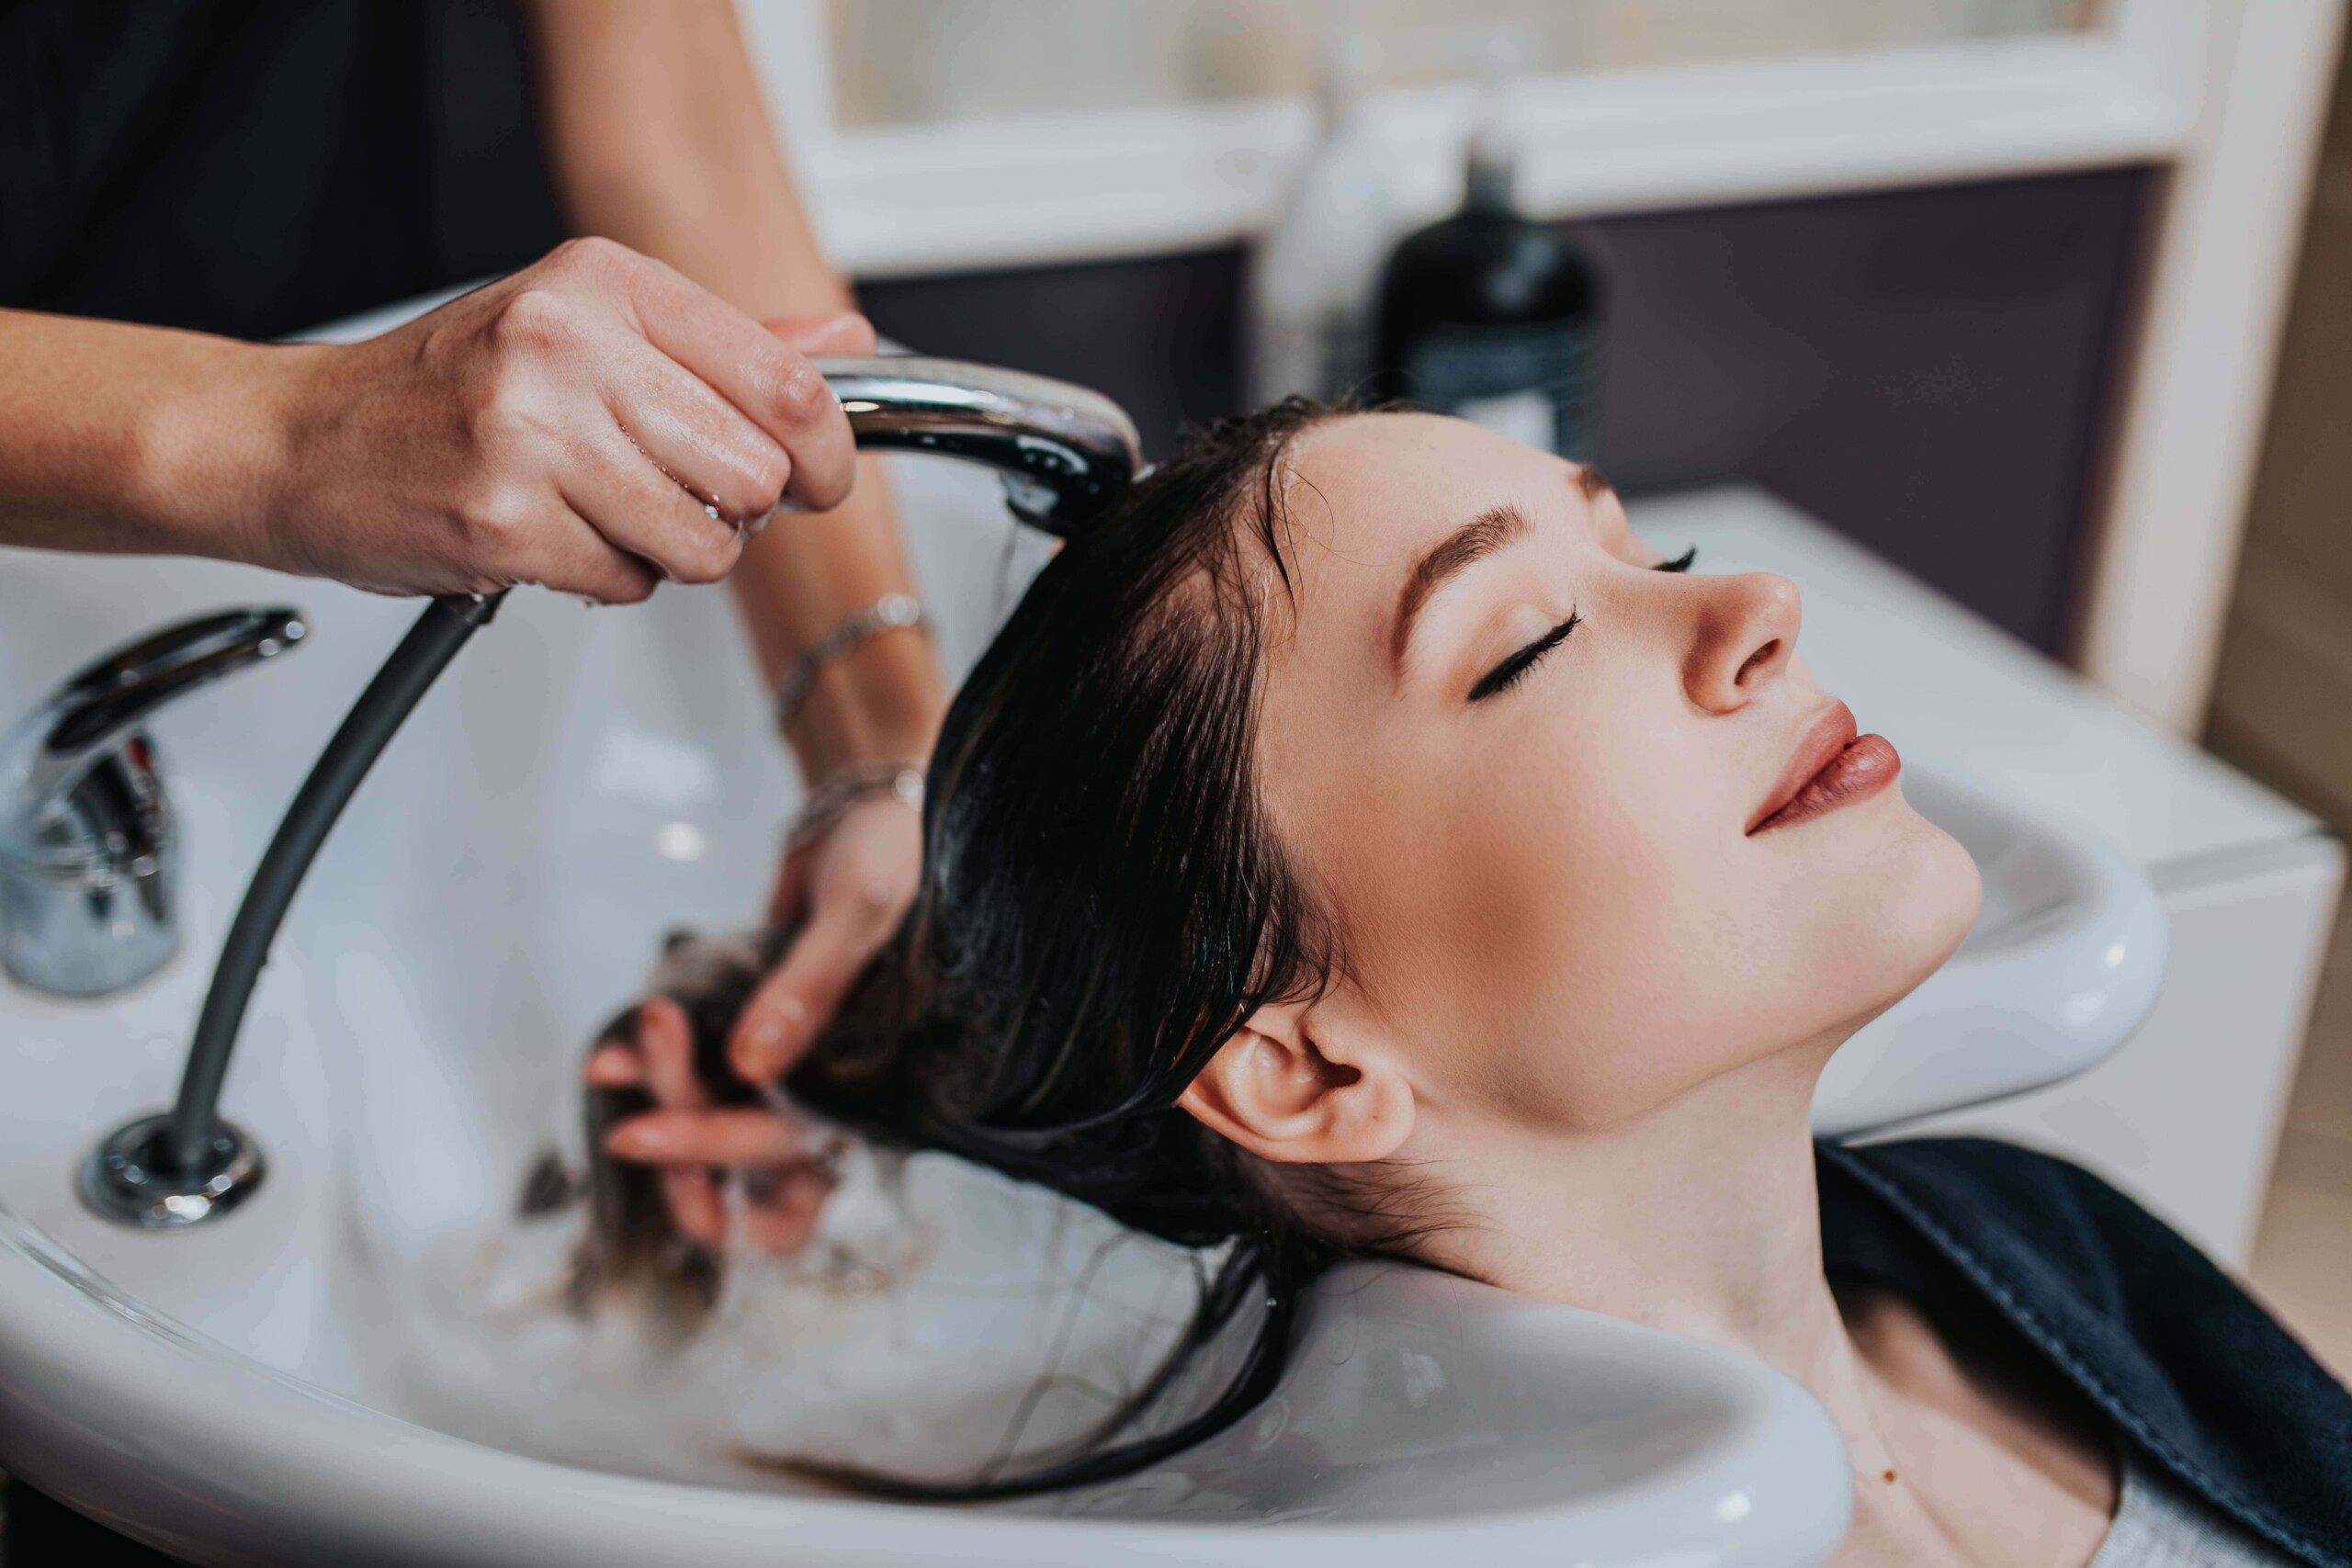 Should You Wash Your Hair Before Dyeing It?